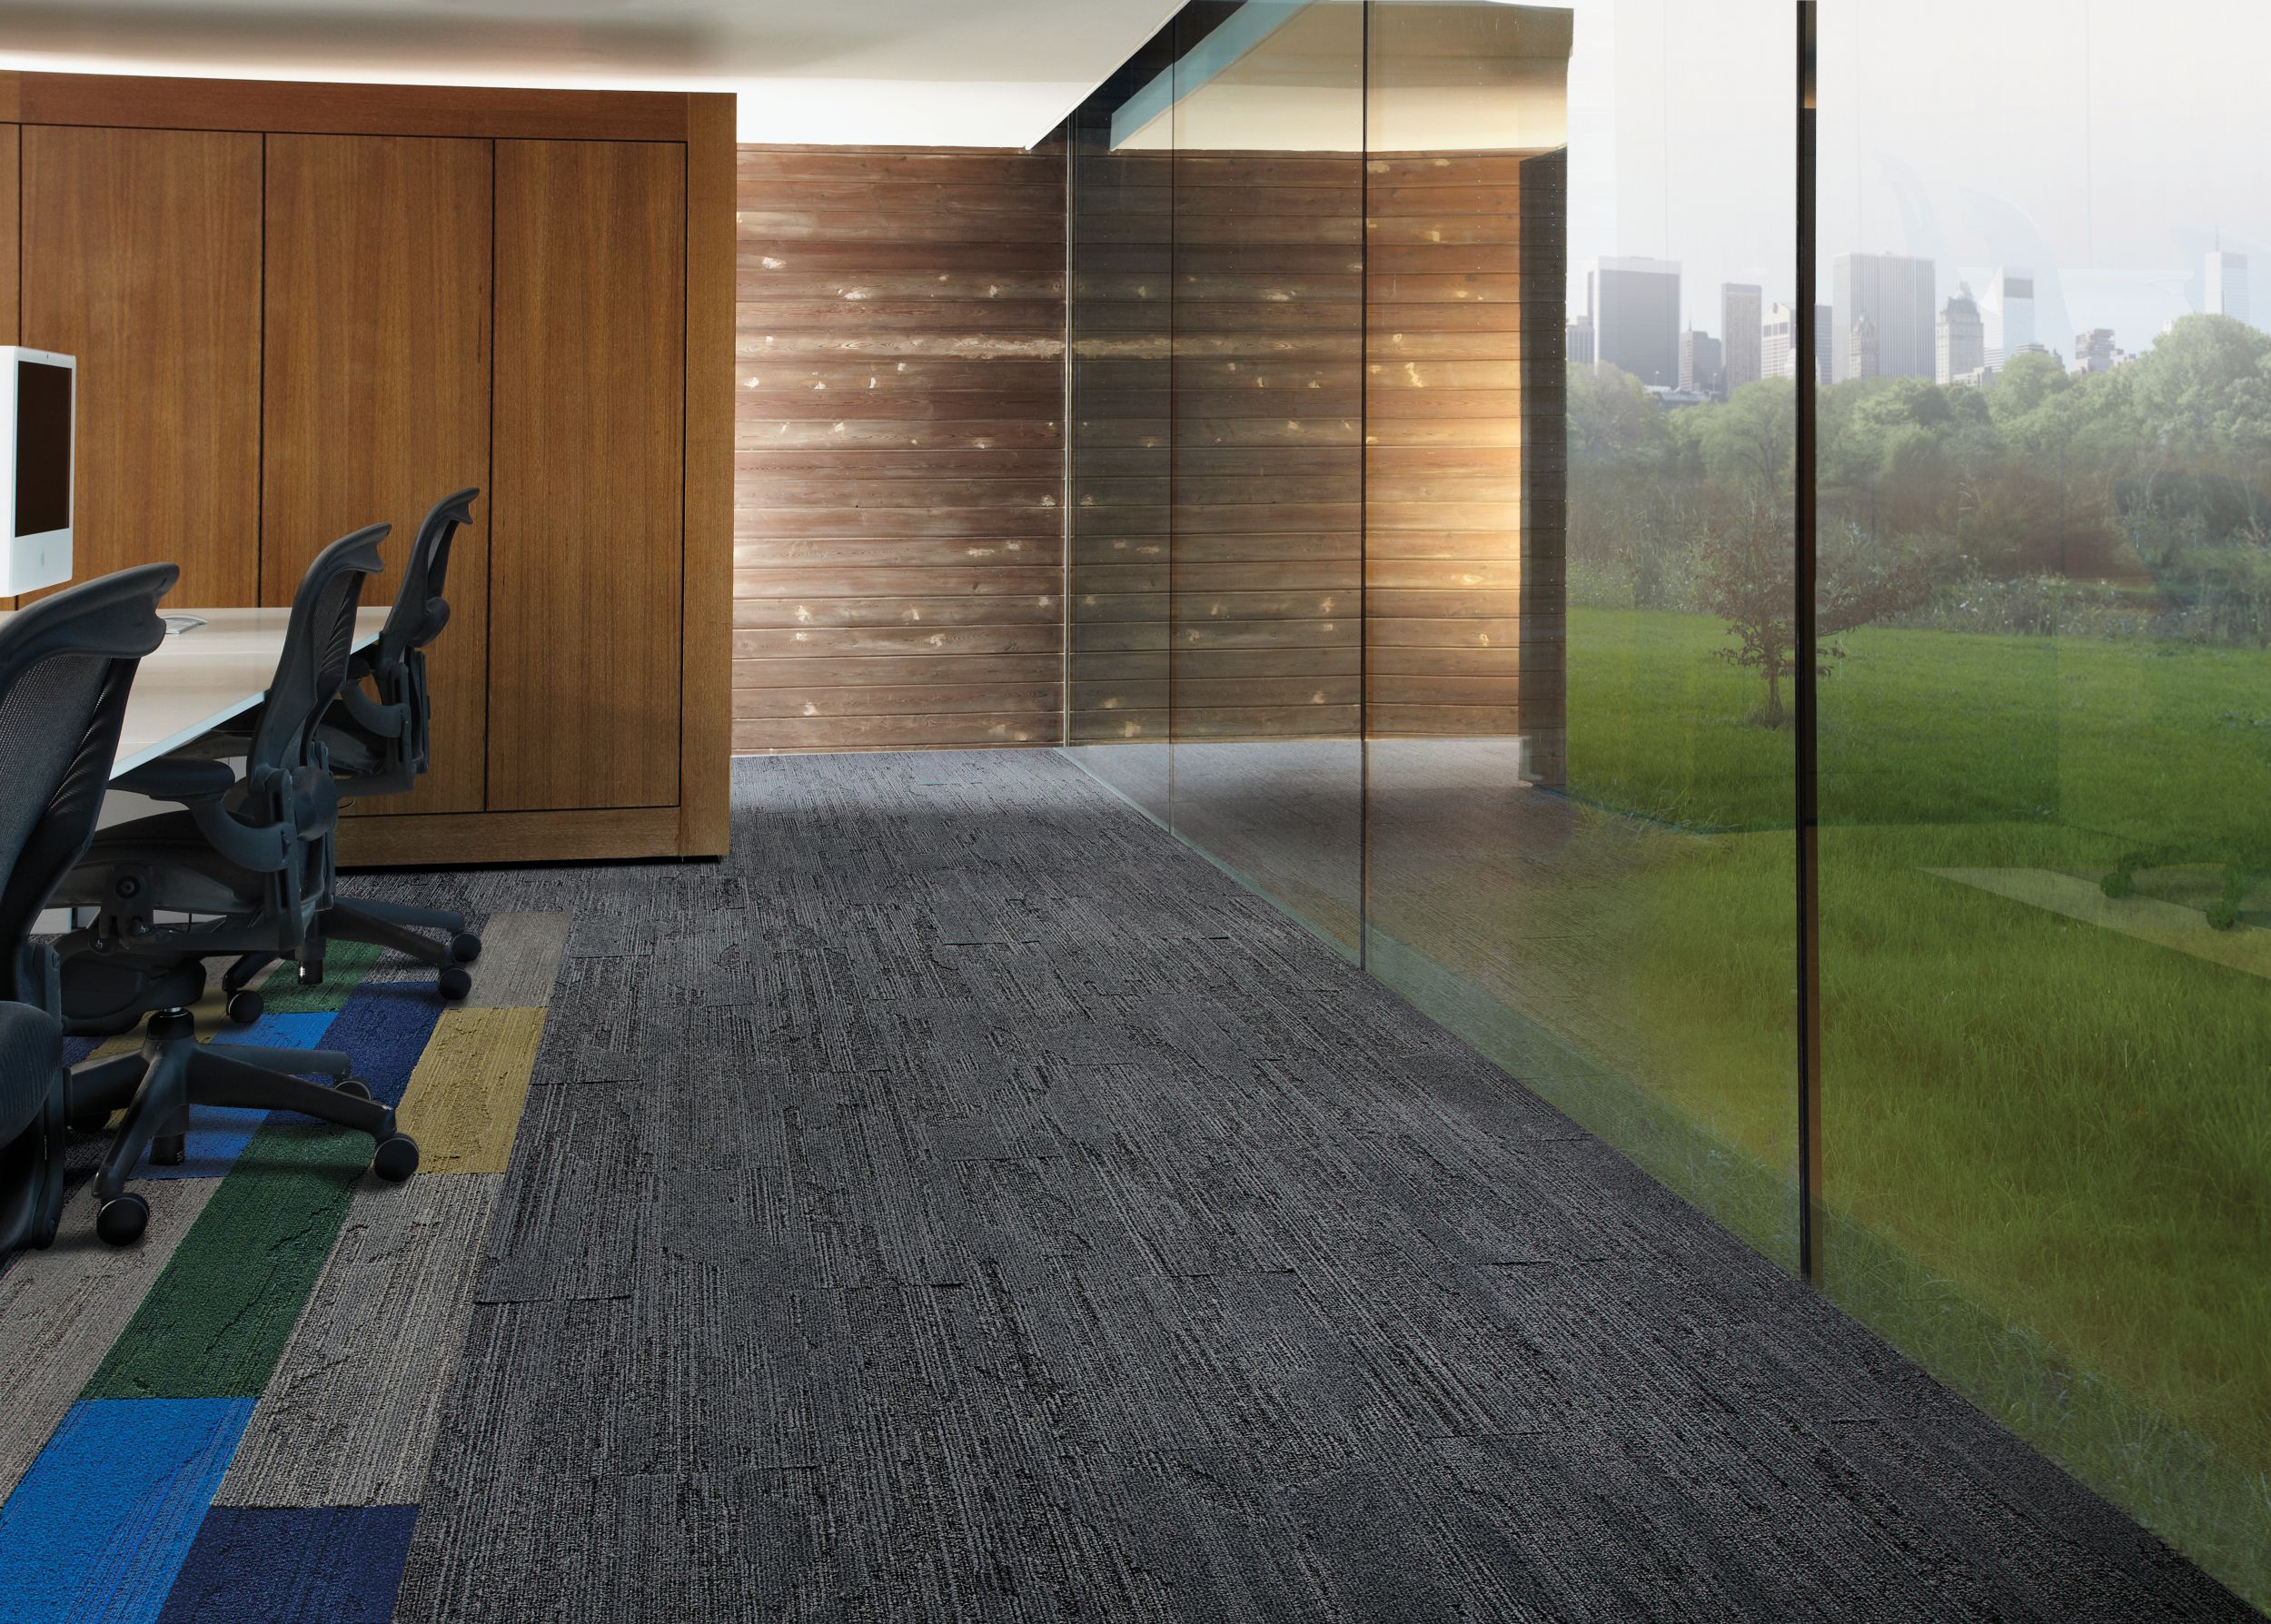 Interface UR501 plank carpet tile in multiple colors in meeting room with large windows imagen número 4